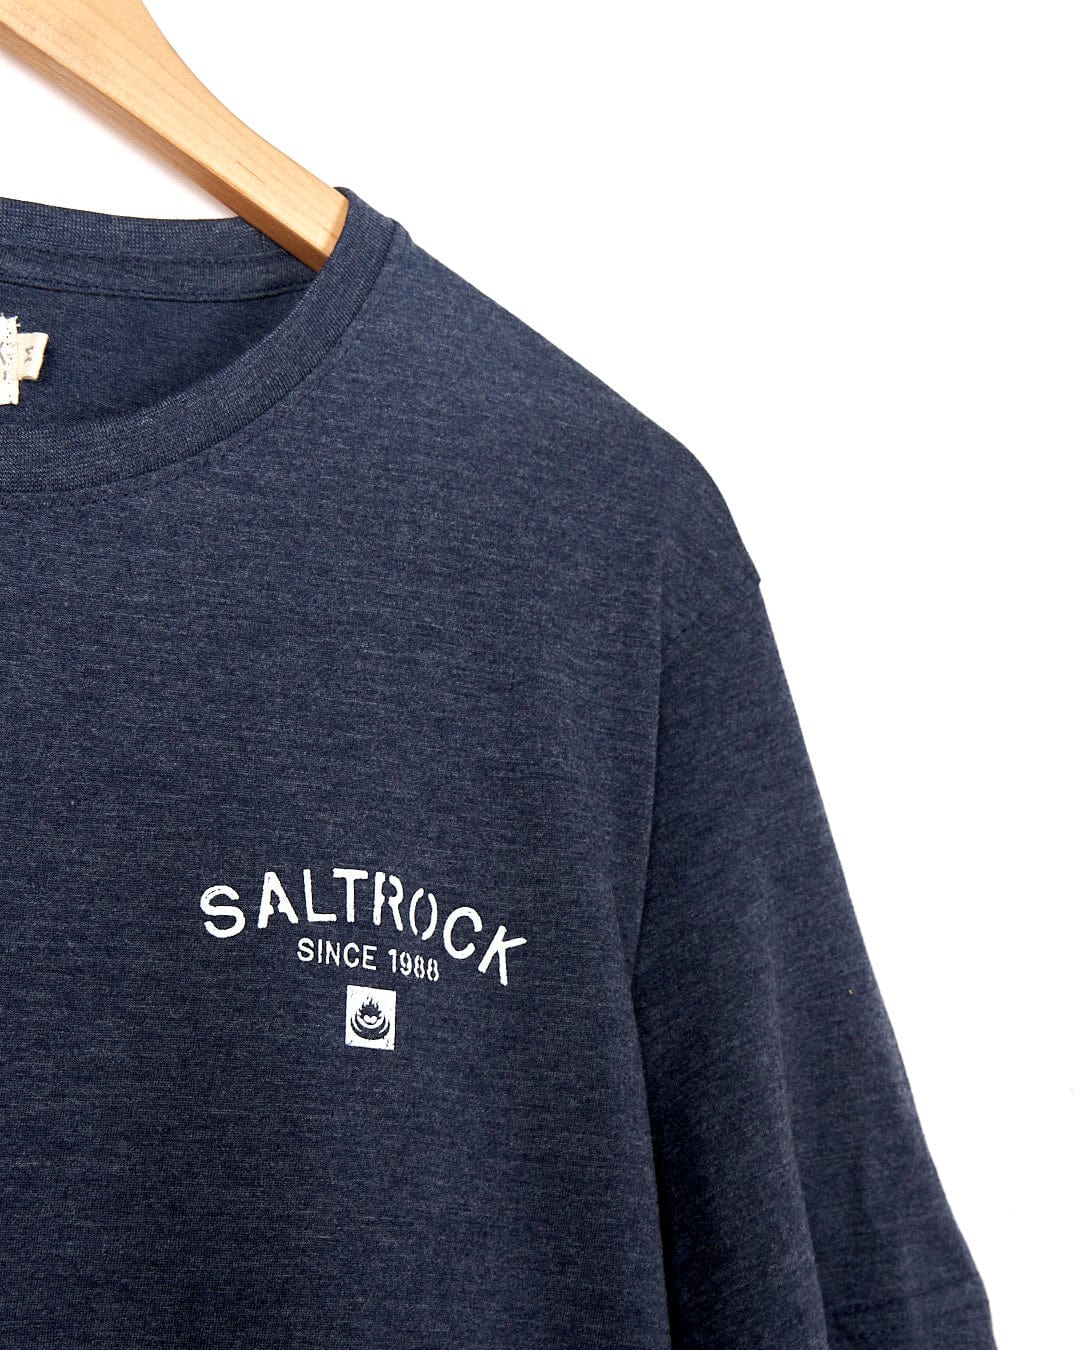 A Stencil - Mens Location T-Shirt - Croyde - Dress Blue with the brand name Saltrock on it.